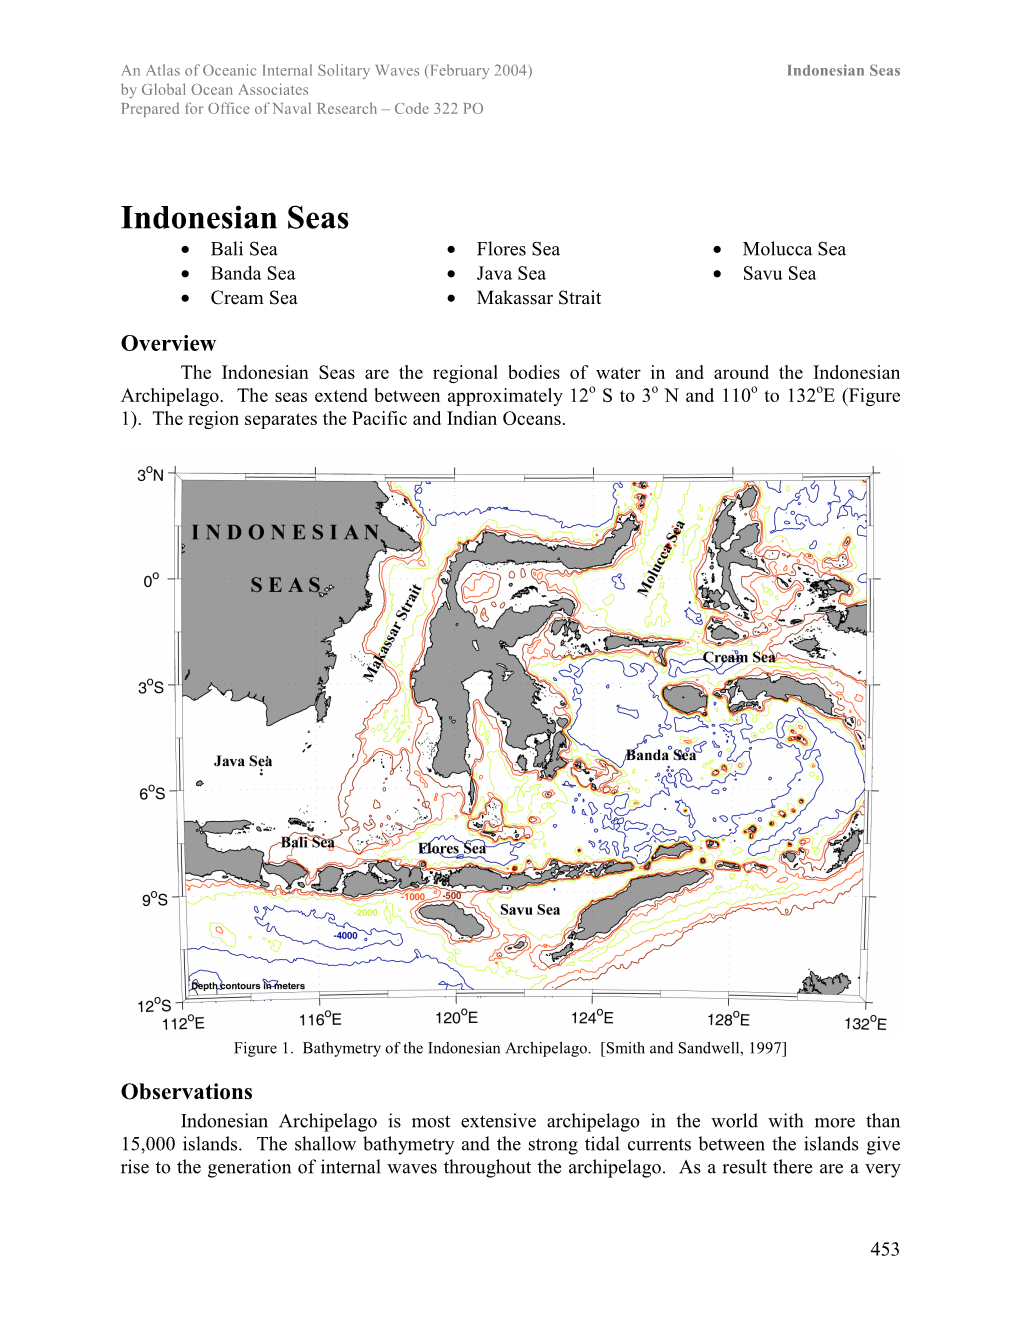 Indonesian Seas by Global Ocean Associates Prepared for Office of Naval Research – Code 322 PO